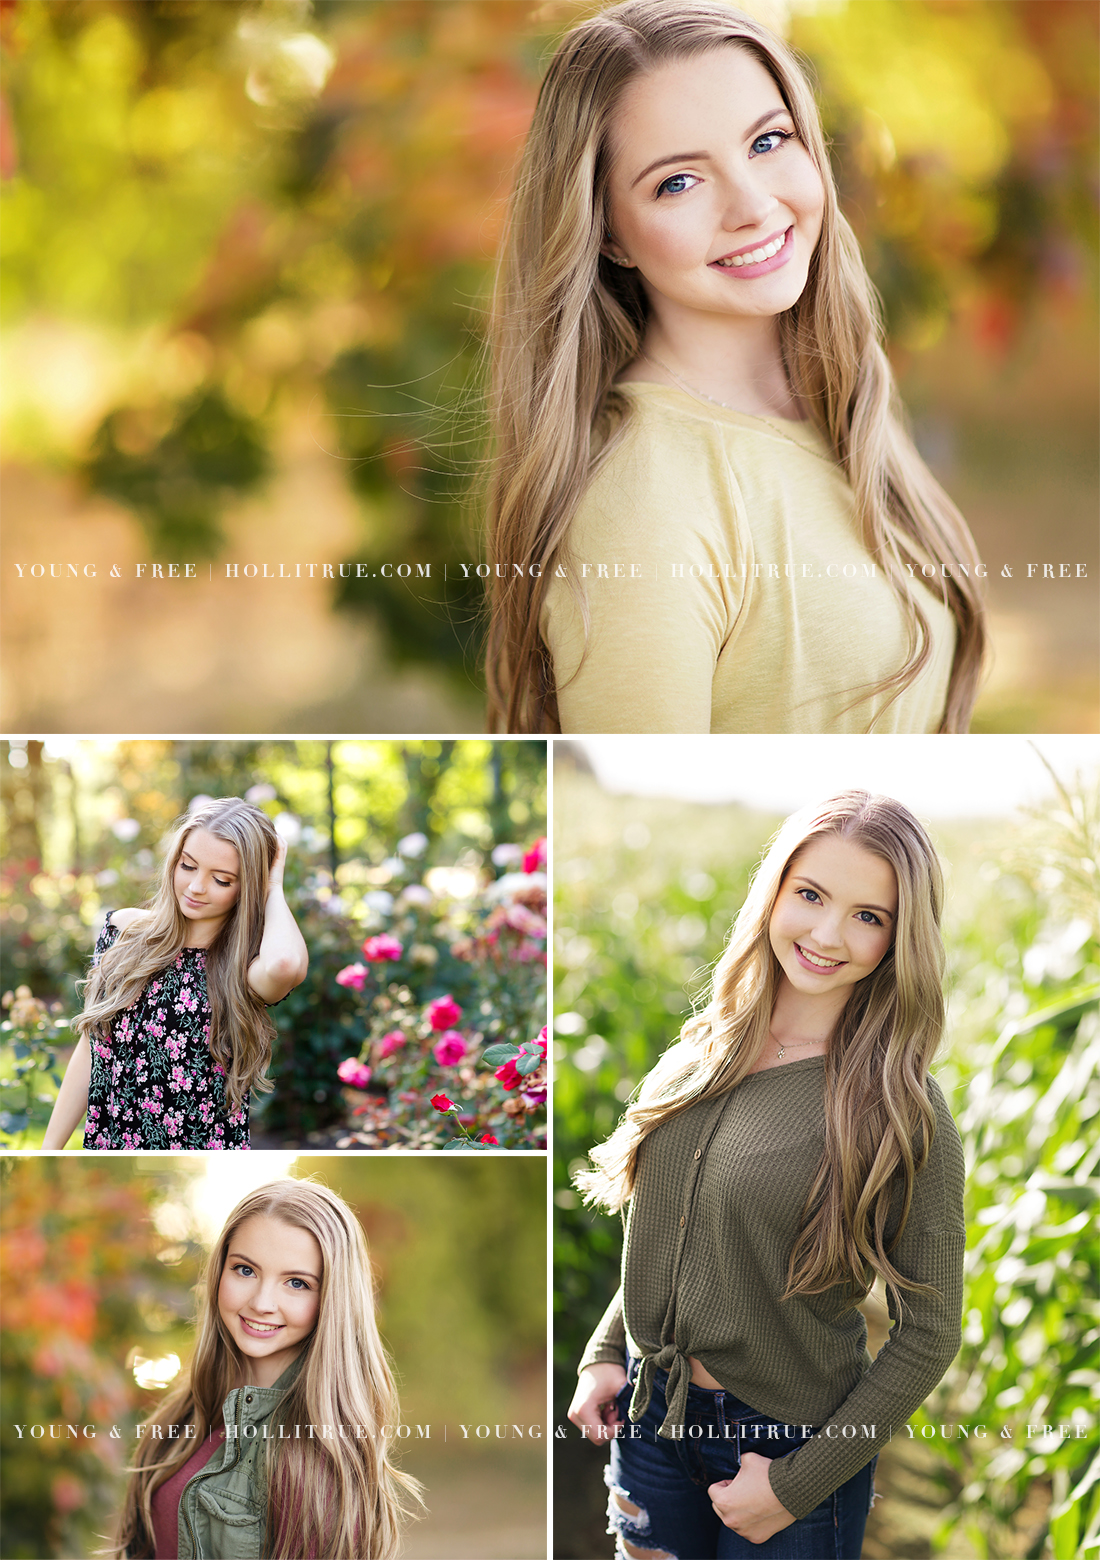 Eugene Senior Photographer Holli True Photography Downtown Garden Nature High Senior Pictures Oregon Senior Outfit Locations Authentic Real Natural Candid Moments Photography Mentoring Photography Workshop Senior Posing Education for Photographers Bokeh Roses Flowers Sunlight